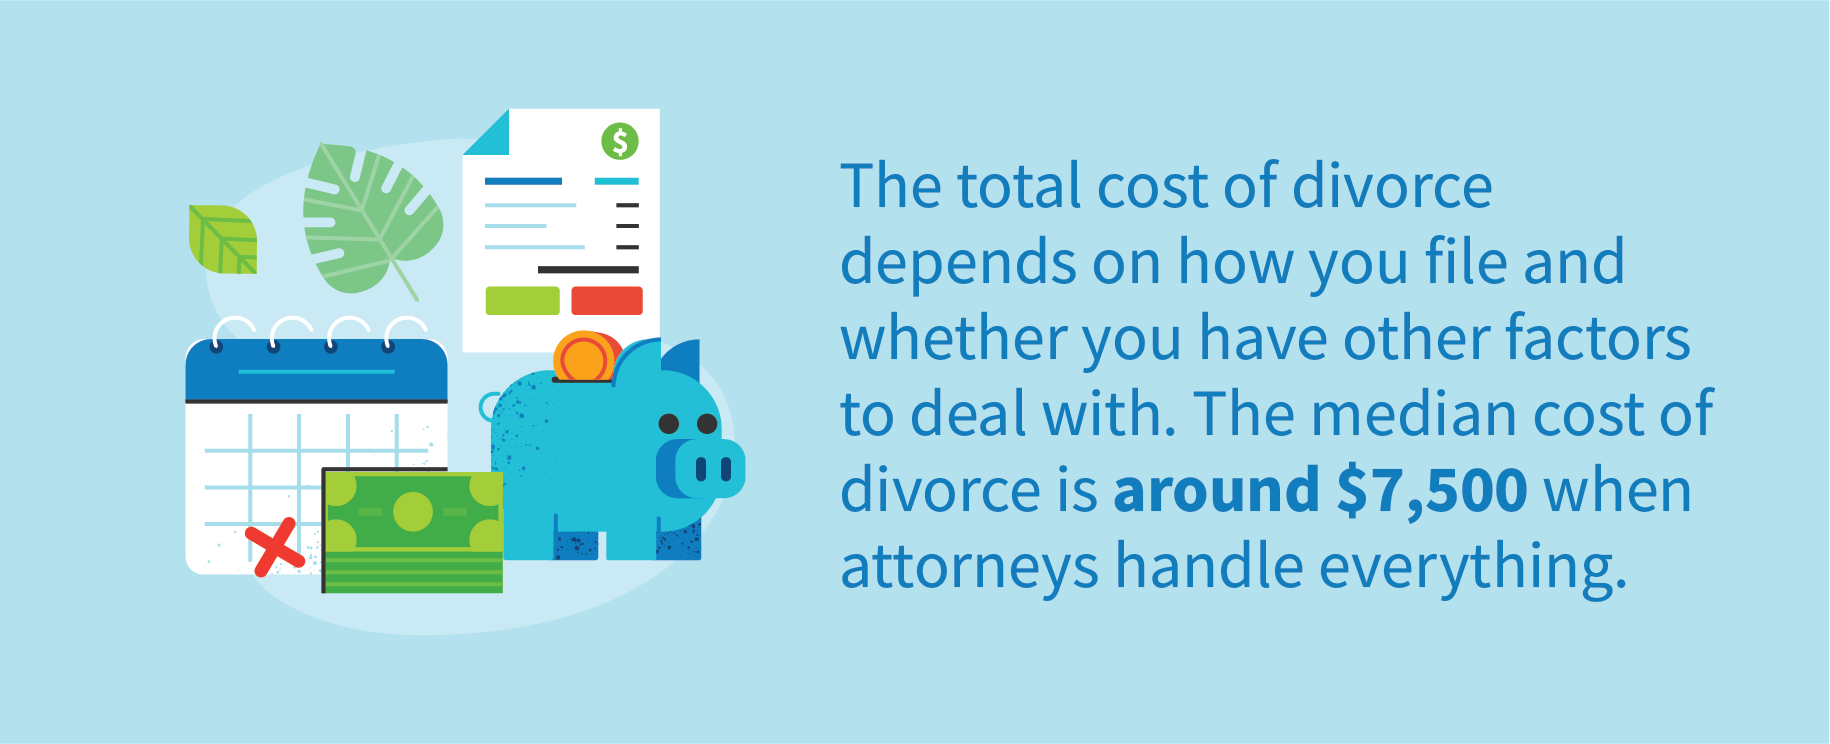 The total cost of divorce depends on how you file and whether you have other factors to deal with. The median cost of divorce is around $7,500 when attorneys handle everything. 